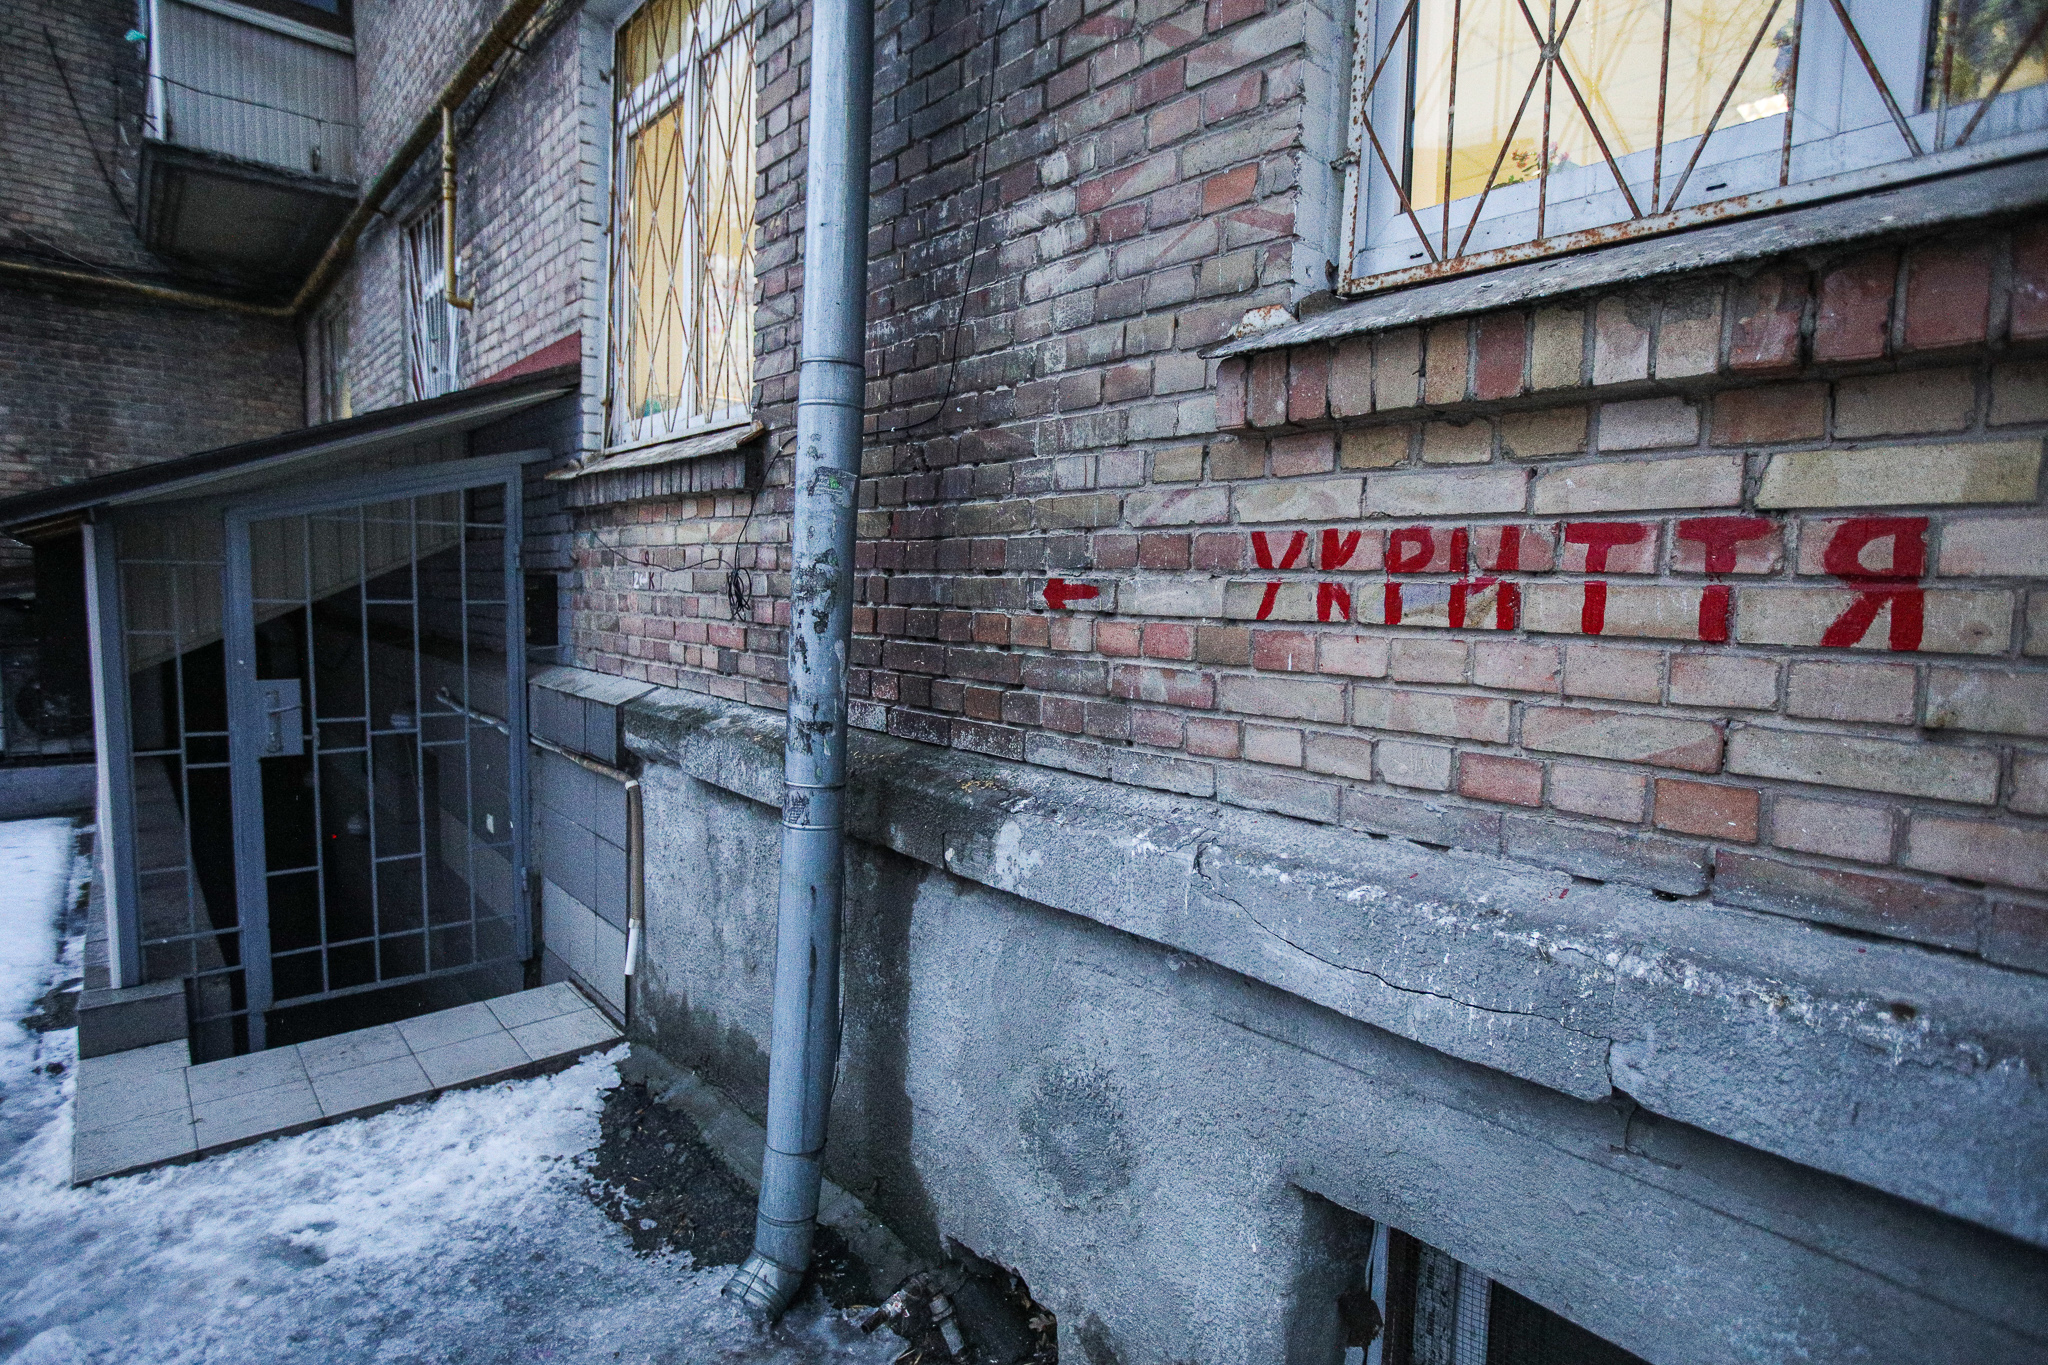 Kyiv's Cold War-era bomb shelters in dire state (PHOTOS)